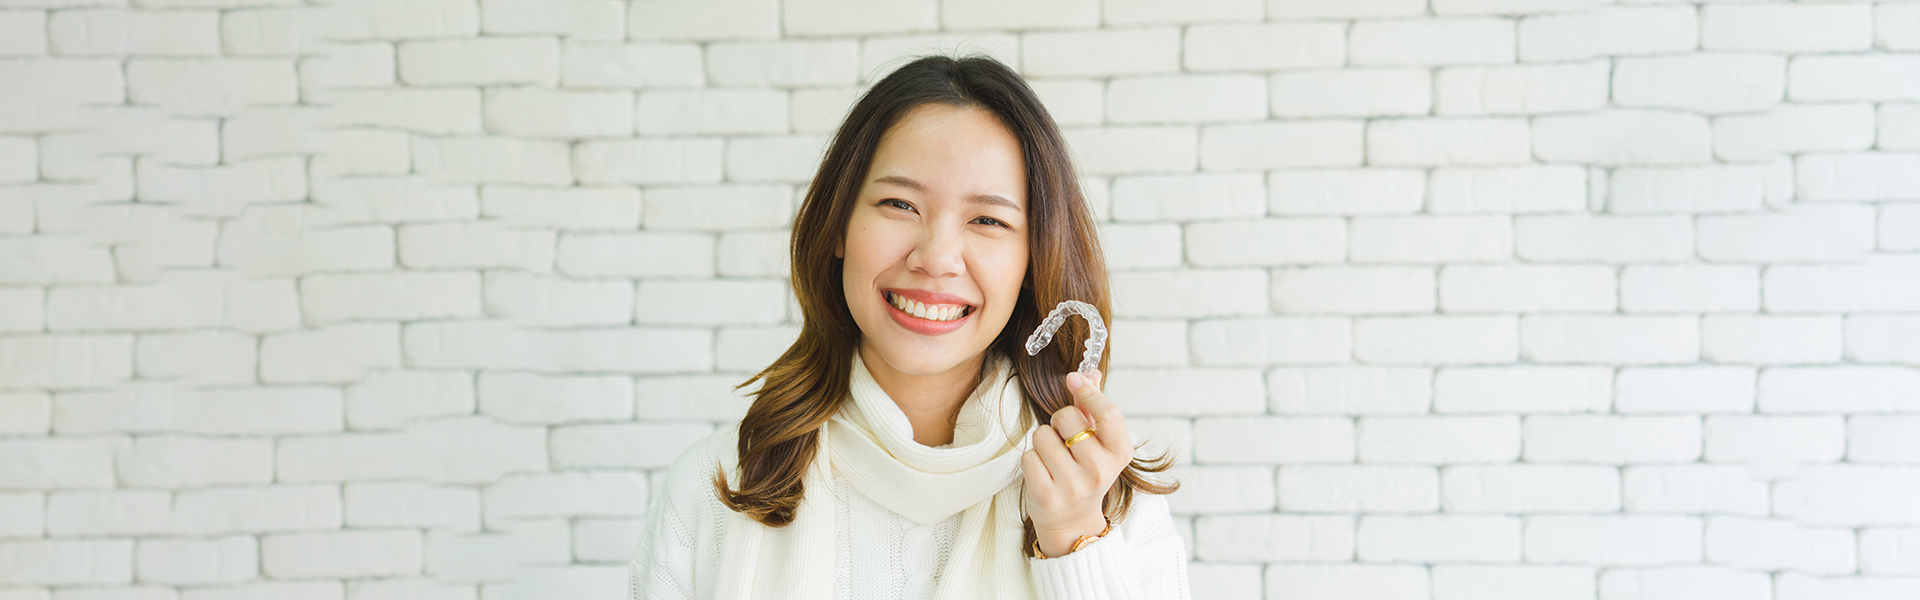 Why Has Invisalign® Aligners Become So Popular?